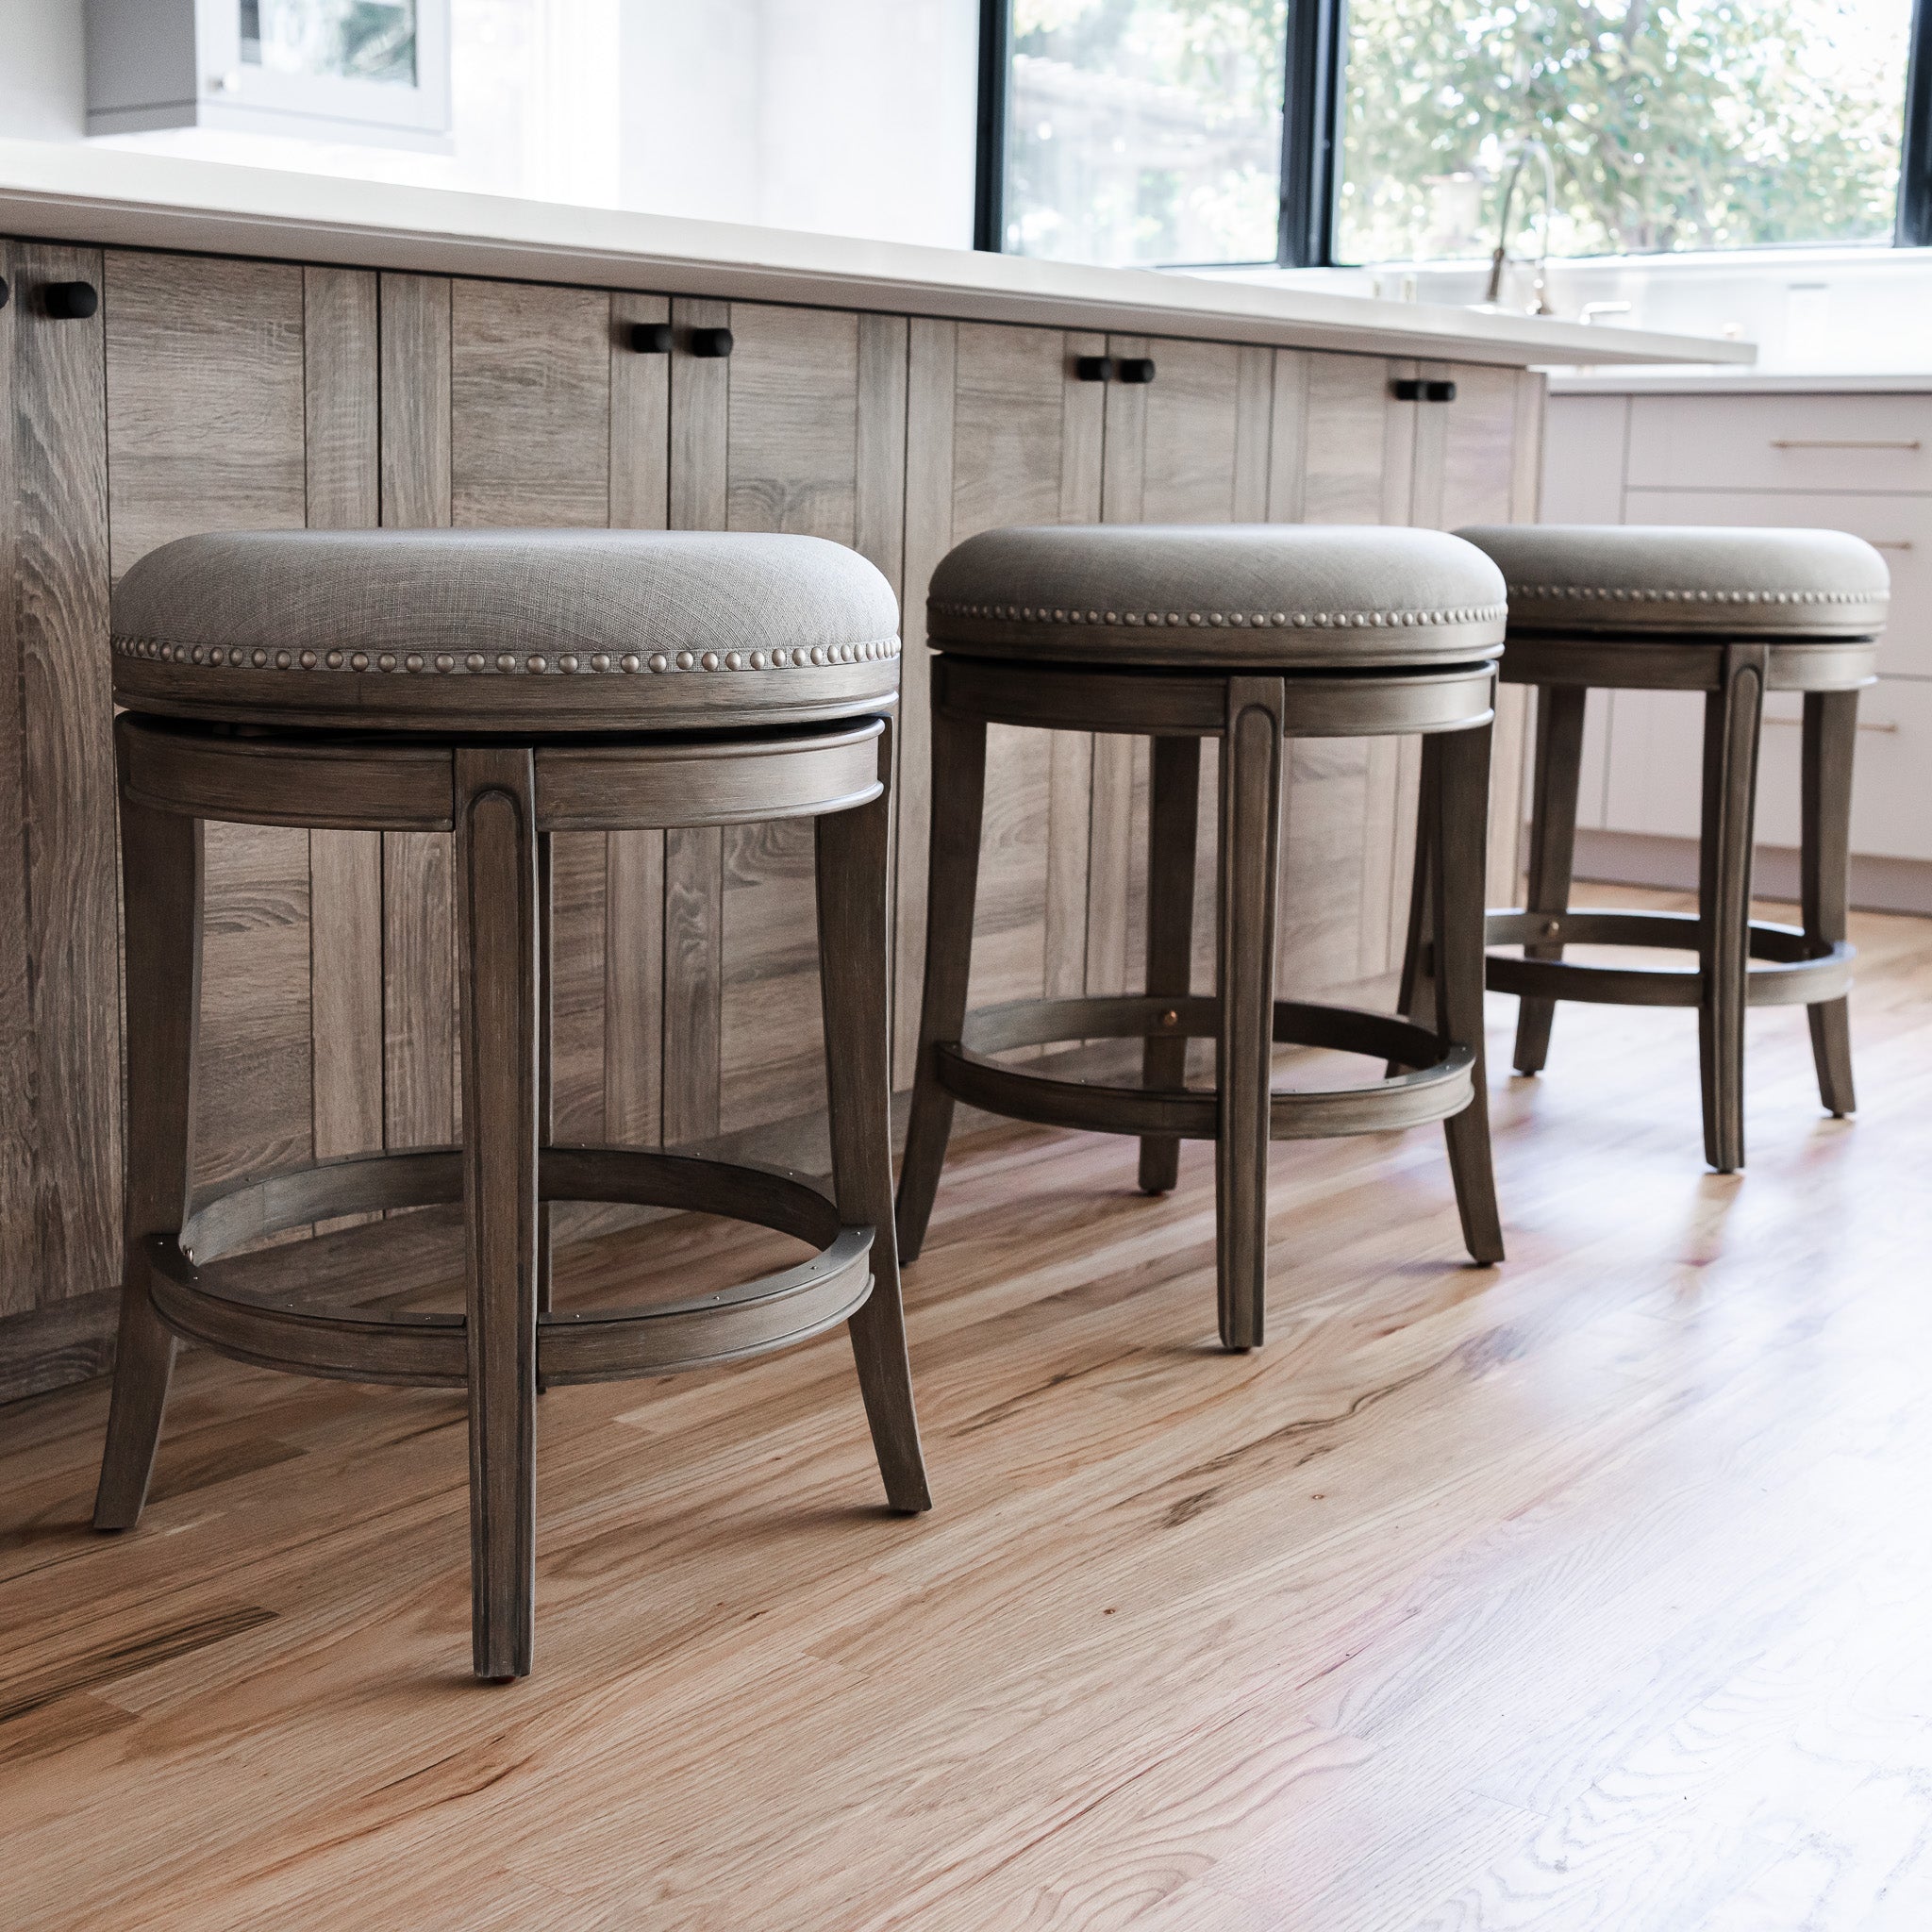 Alexander Backless Bar Stool in Reclaimed Oak Finish with Ash Grey Fabric Upholstery in Stools by Maven Lane